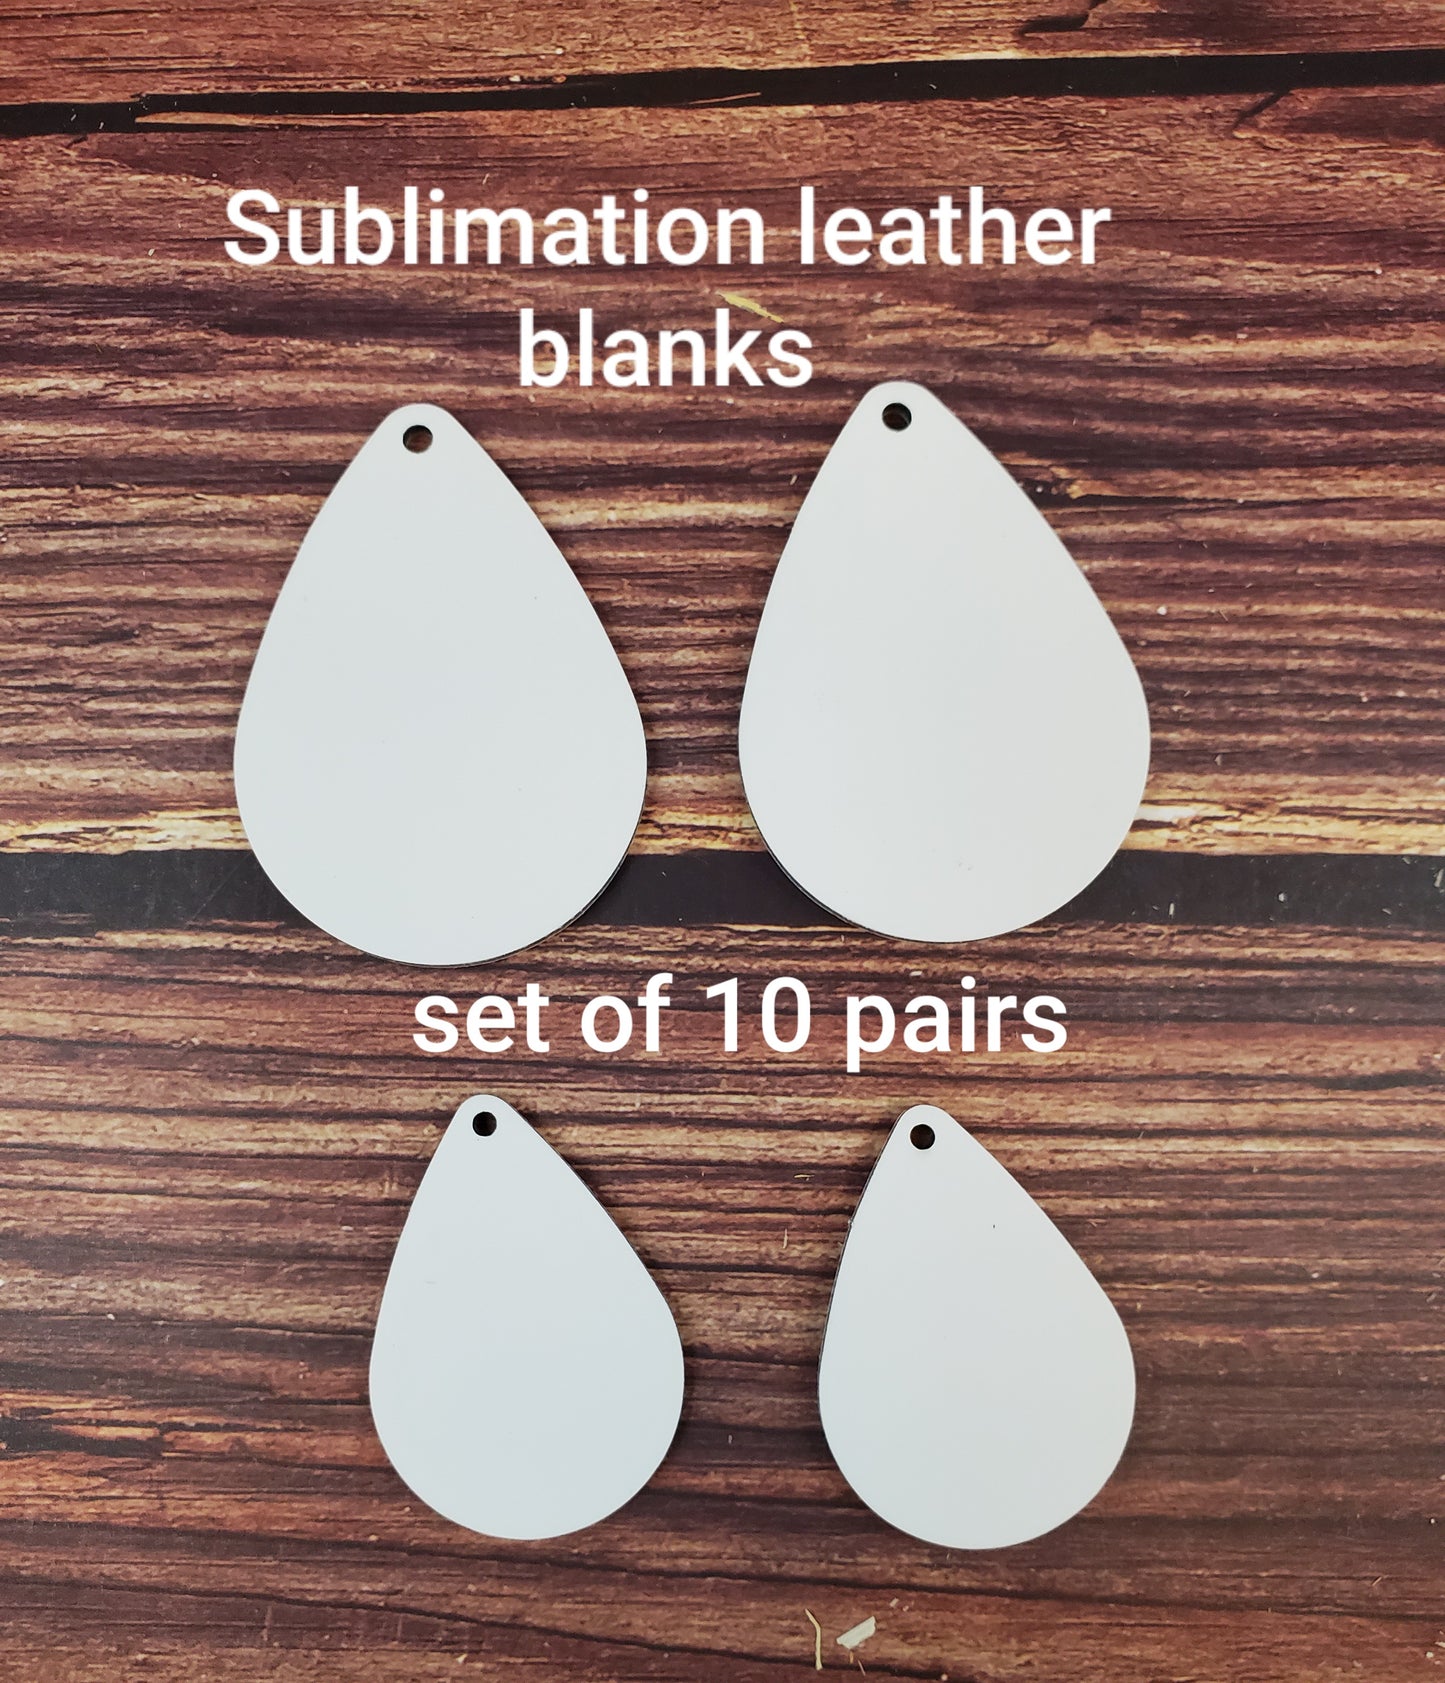 SET OF 10 PAIRS Sublimation LEATHER teardrop earring blanks, teardrop earring sublimation blanks, DOUBLE-sided teardrop earring shape blanks for sublimation